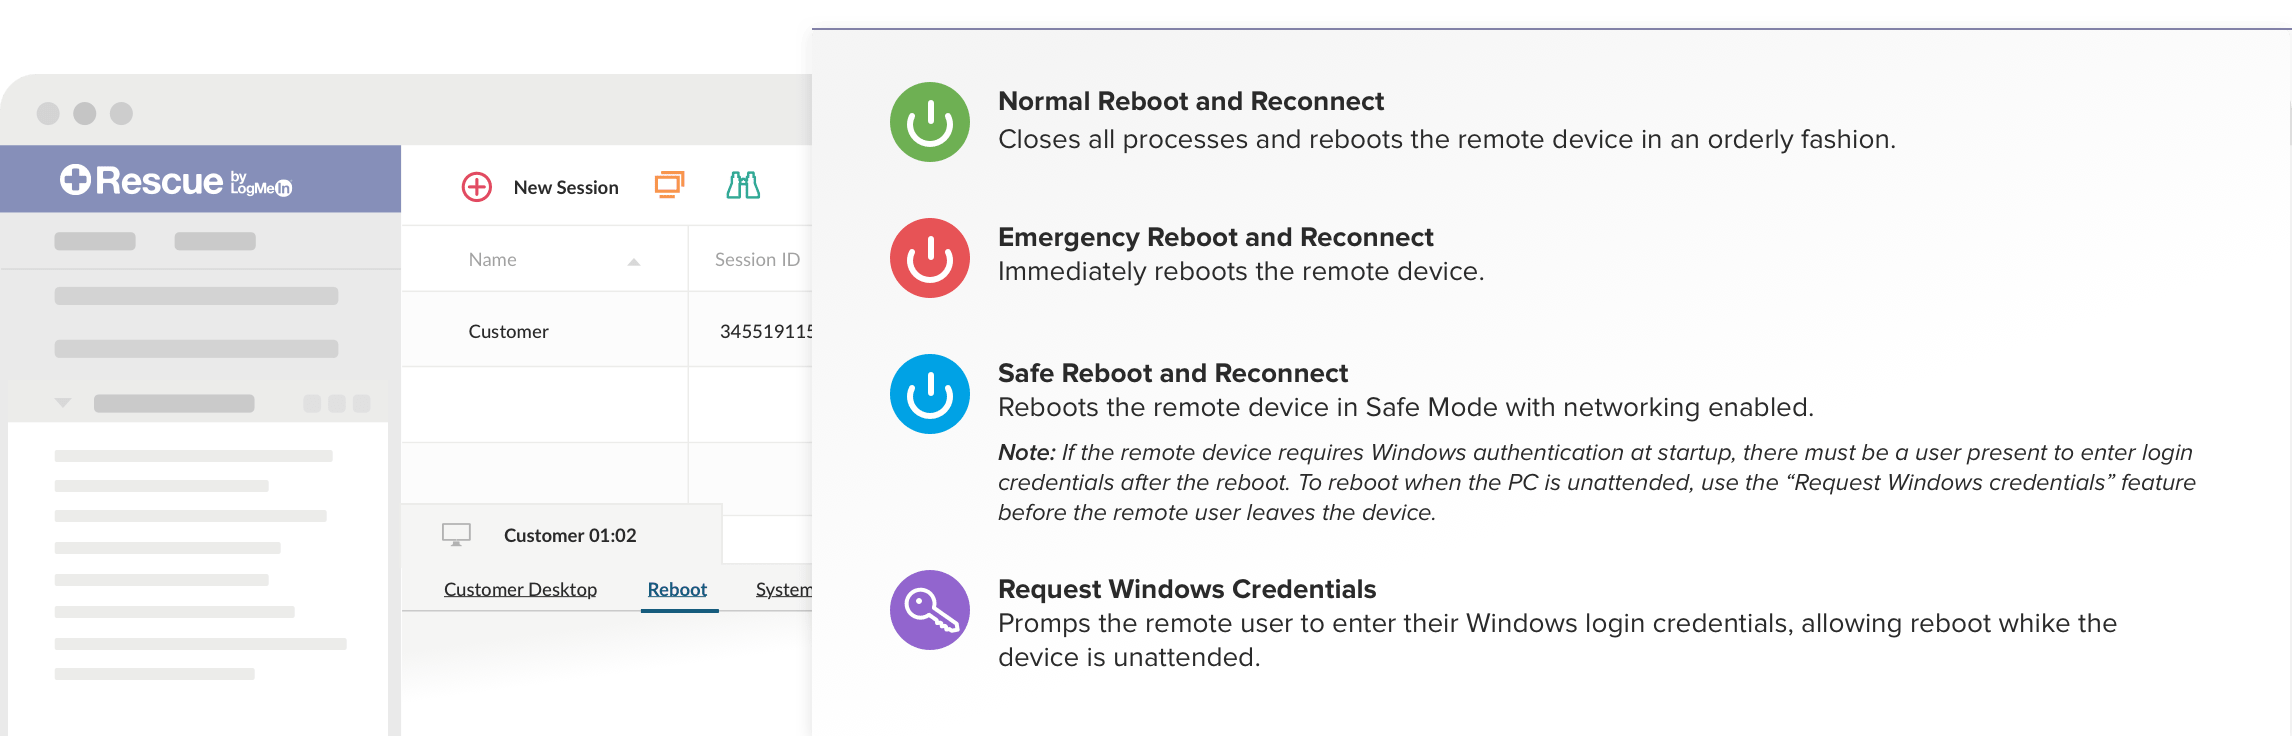 Reboot and reconnect options for remote support session